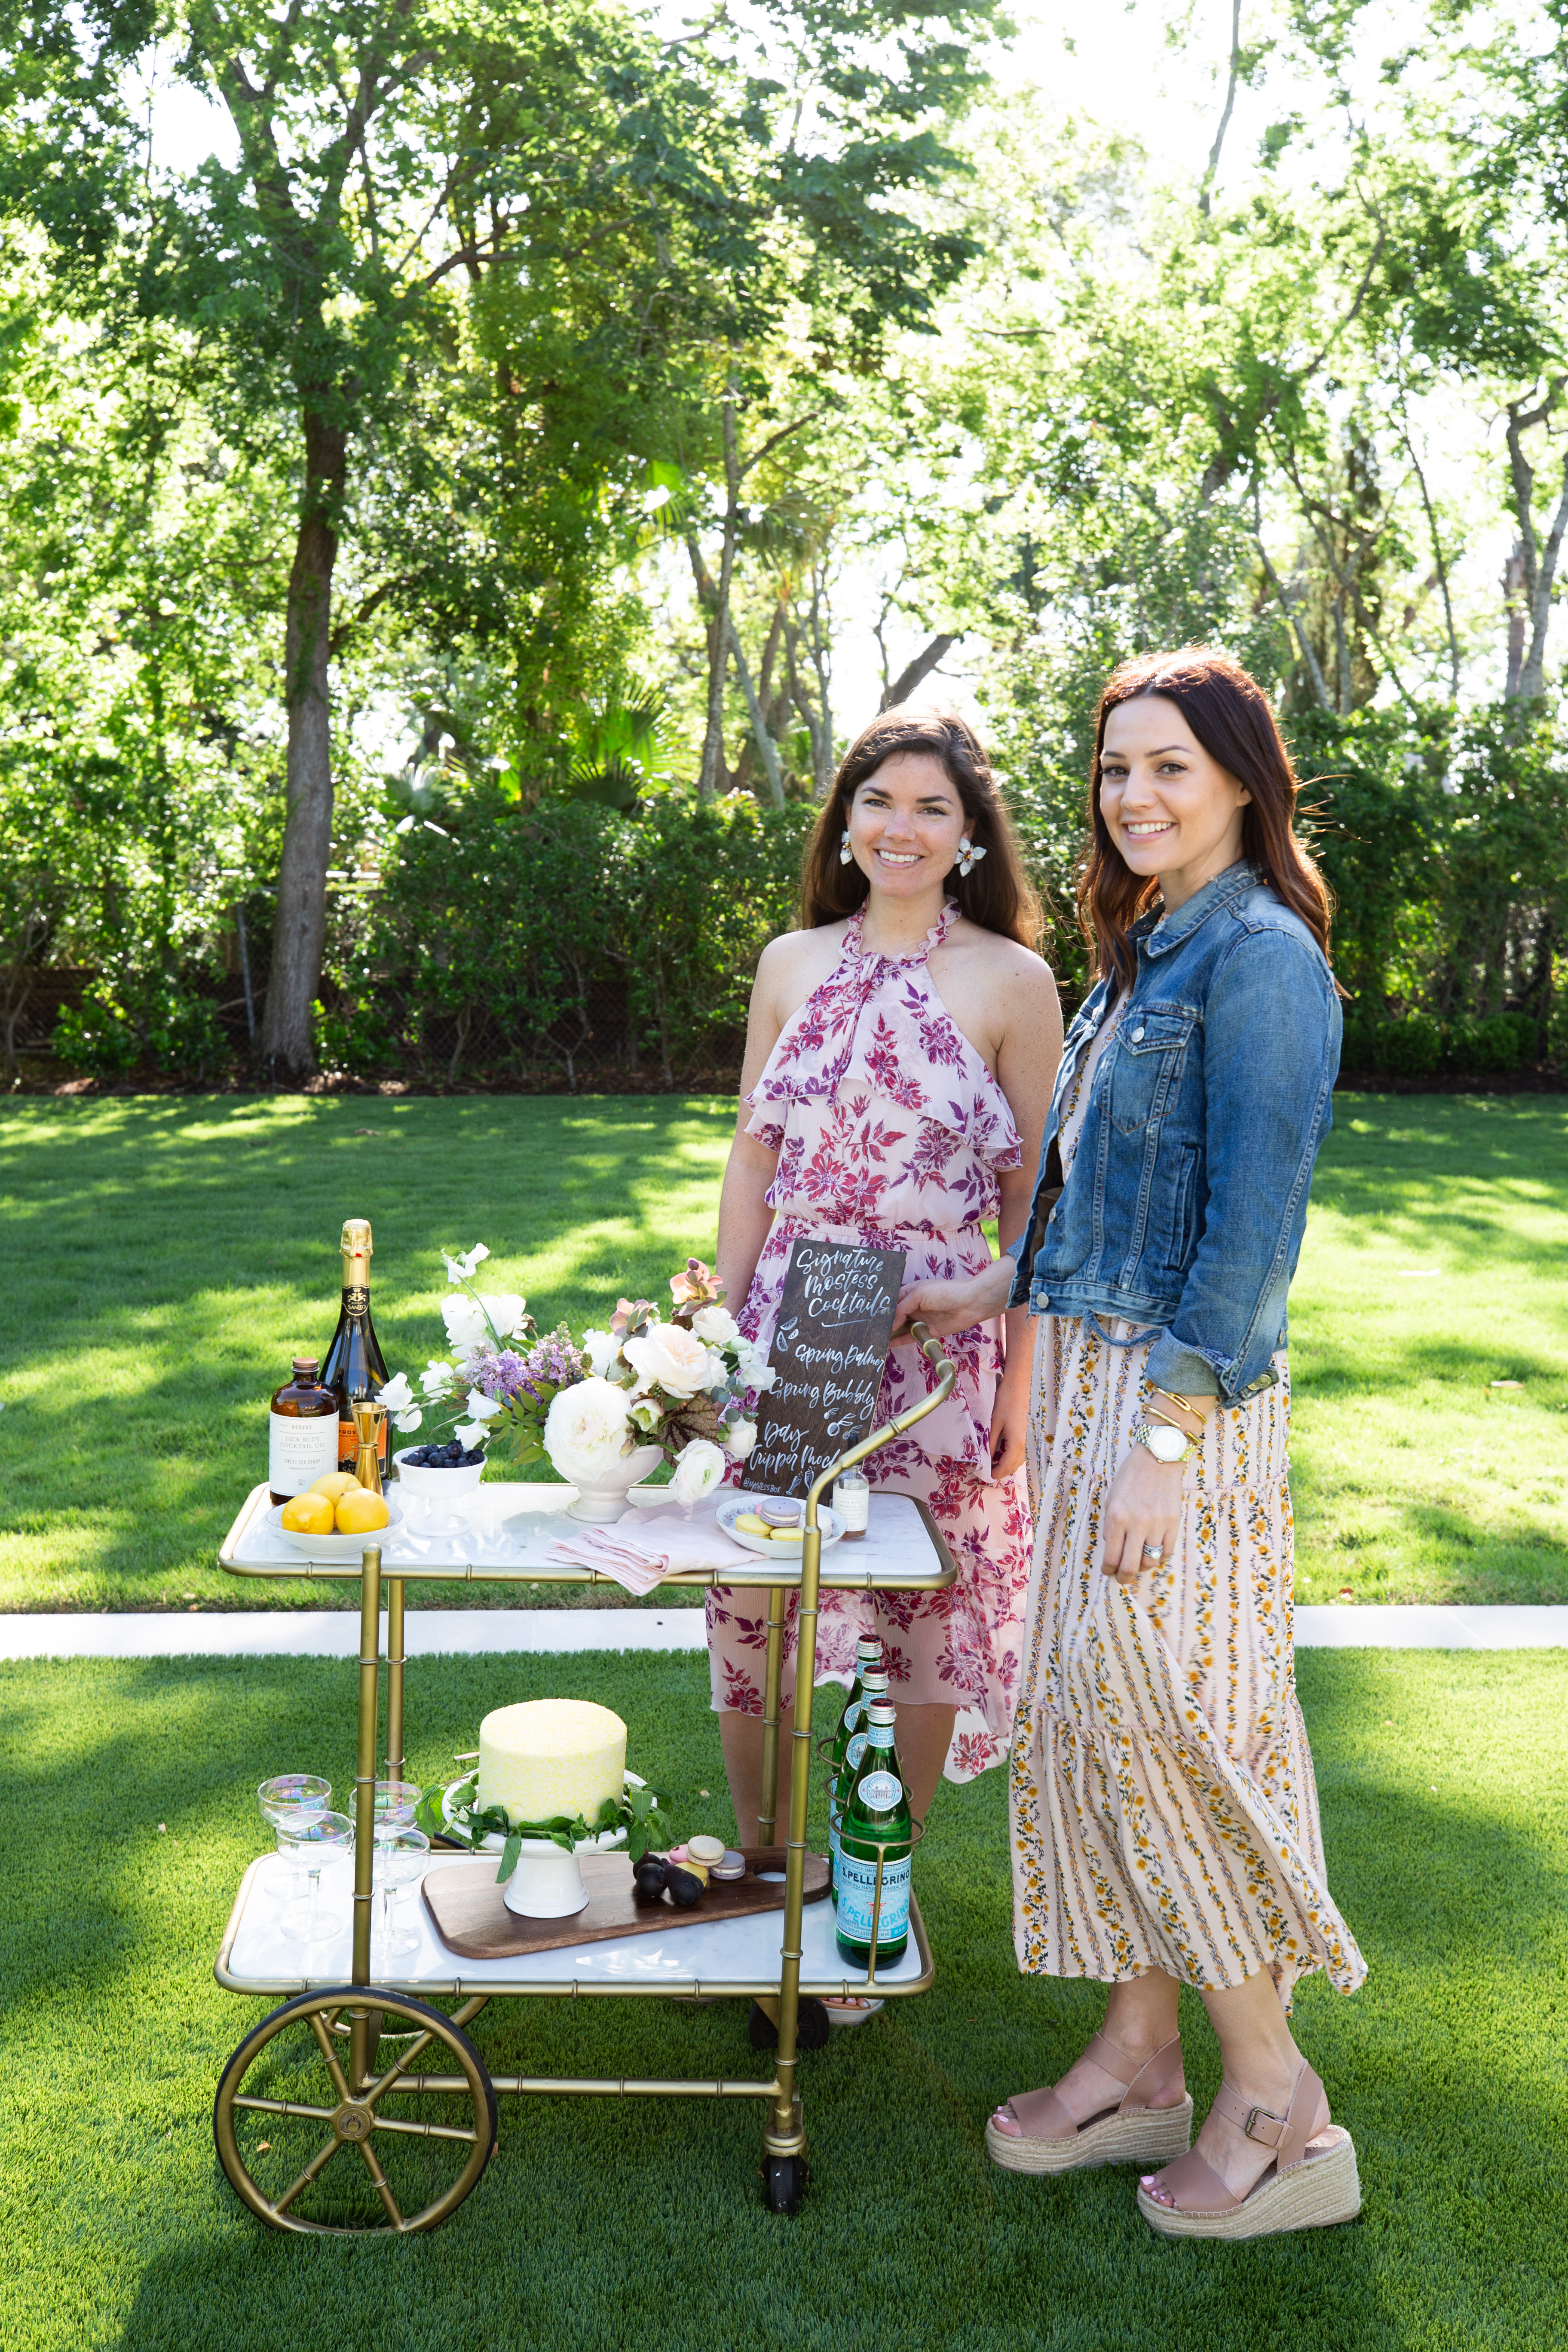 What to Wear to an Outdoor Garden Party ...